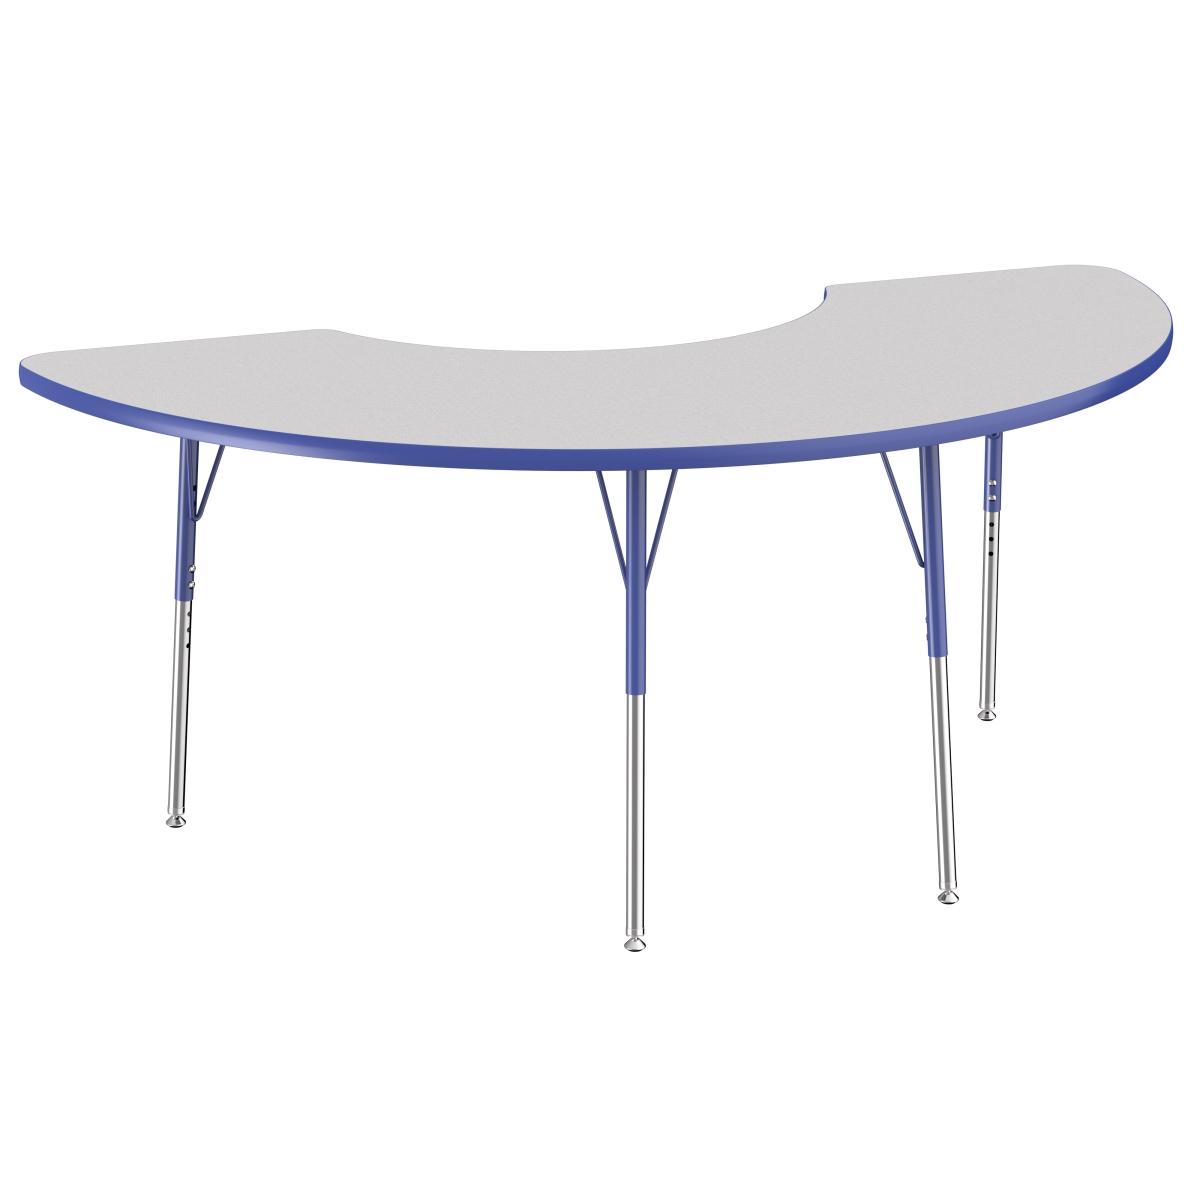 10077-gybl 36 X 72 In. Half Moon T-mold Adjustable Activity Table With Standard Swivel - Grey & Blue